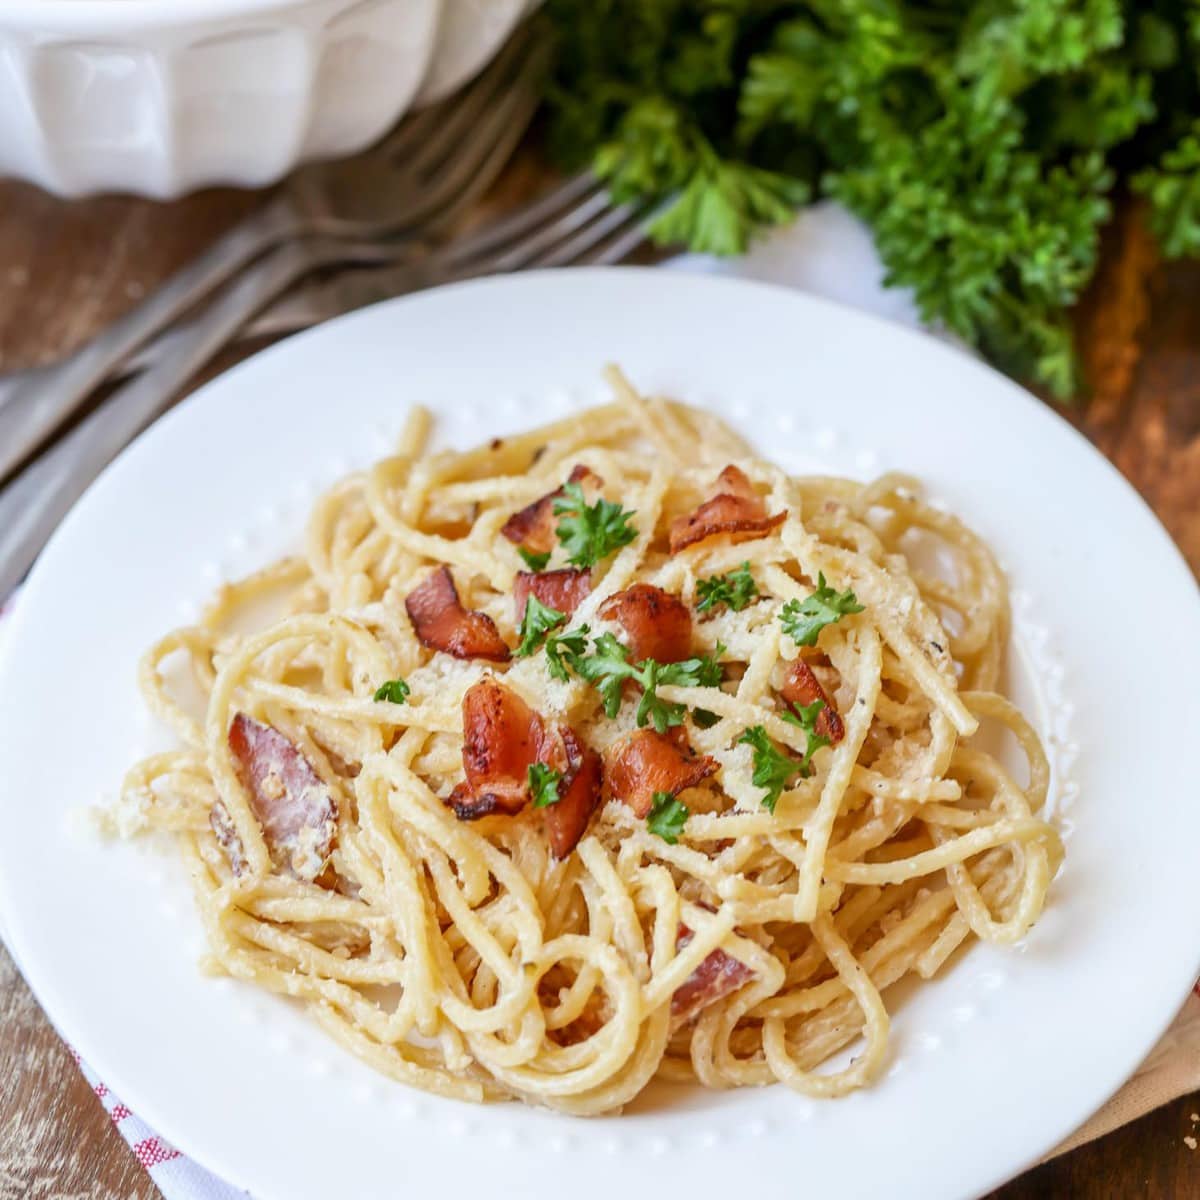 Easy Pasta Recipes - Pasta carbonara served on a white plate.